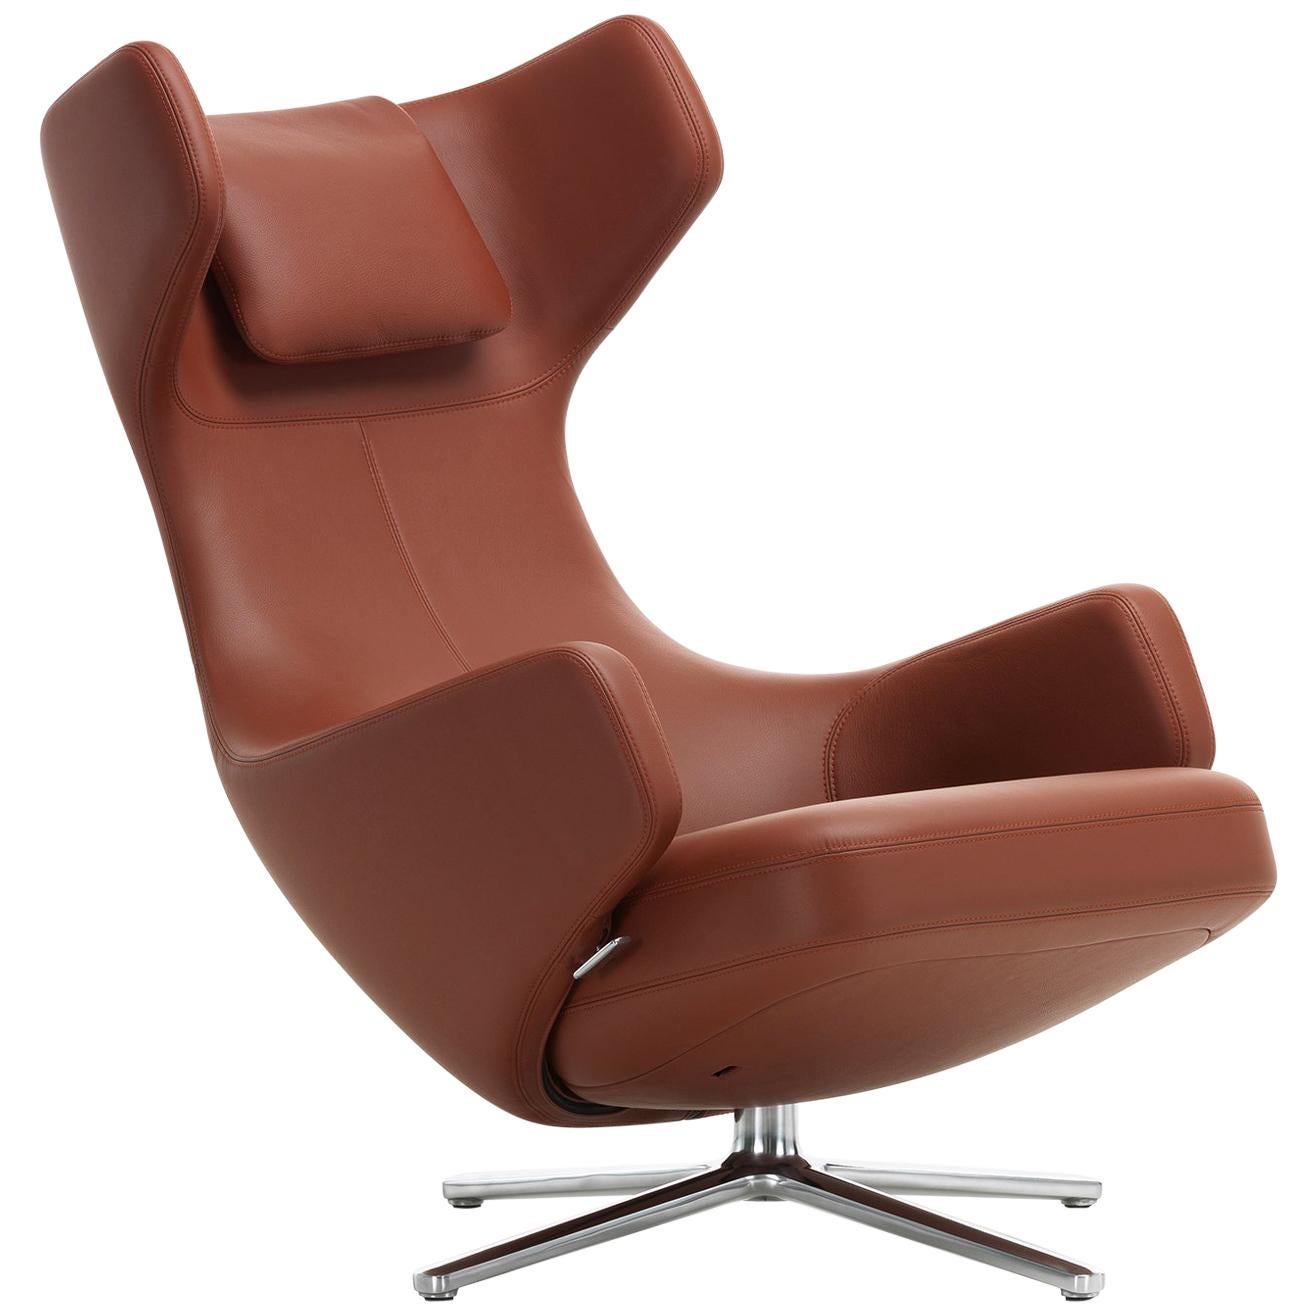 Vitra Grand Repos Lounge Chair in Brandy Leather Premium by Antonio Citterio For Sale